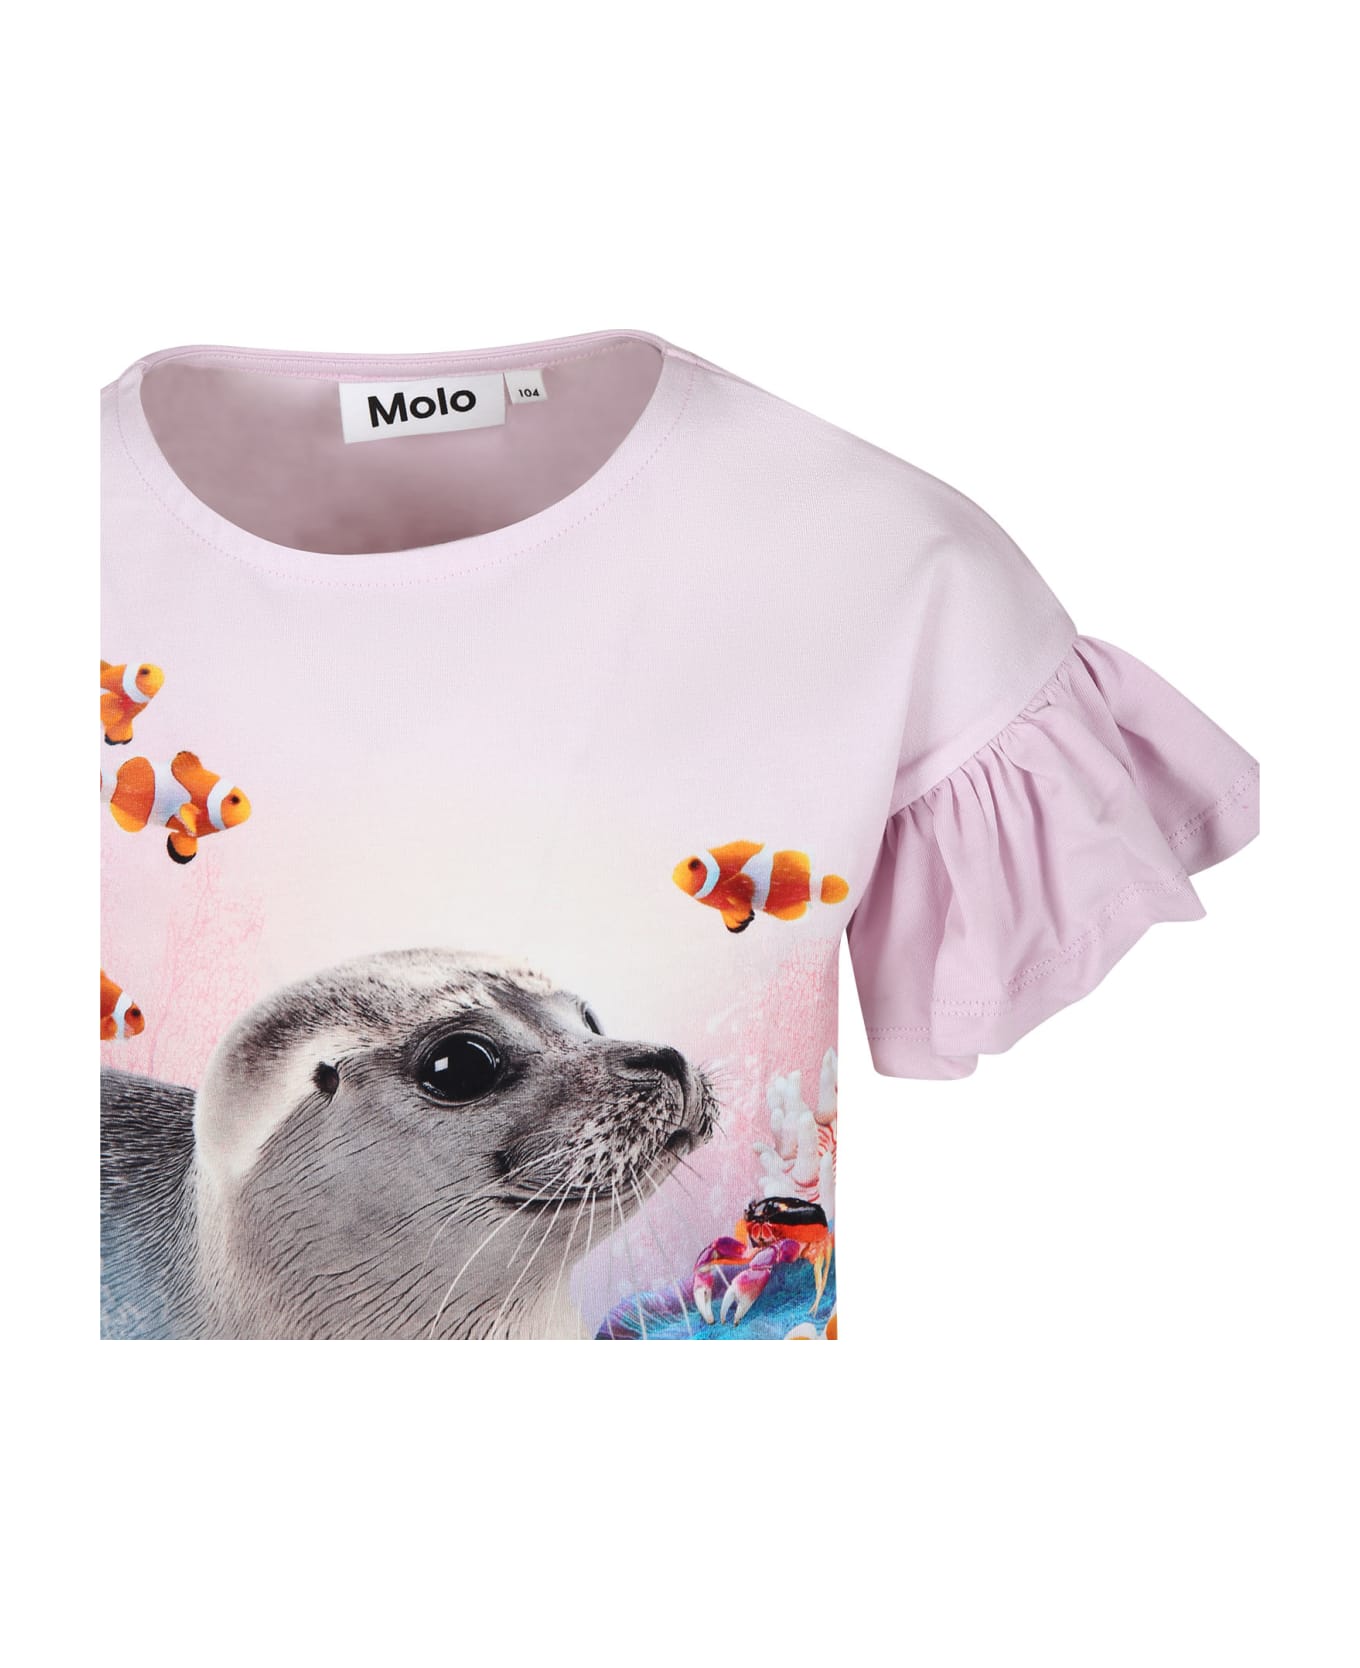 Molo Pink T-shirt For Girl With Seal Print - Pink